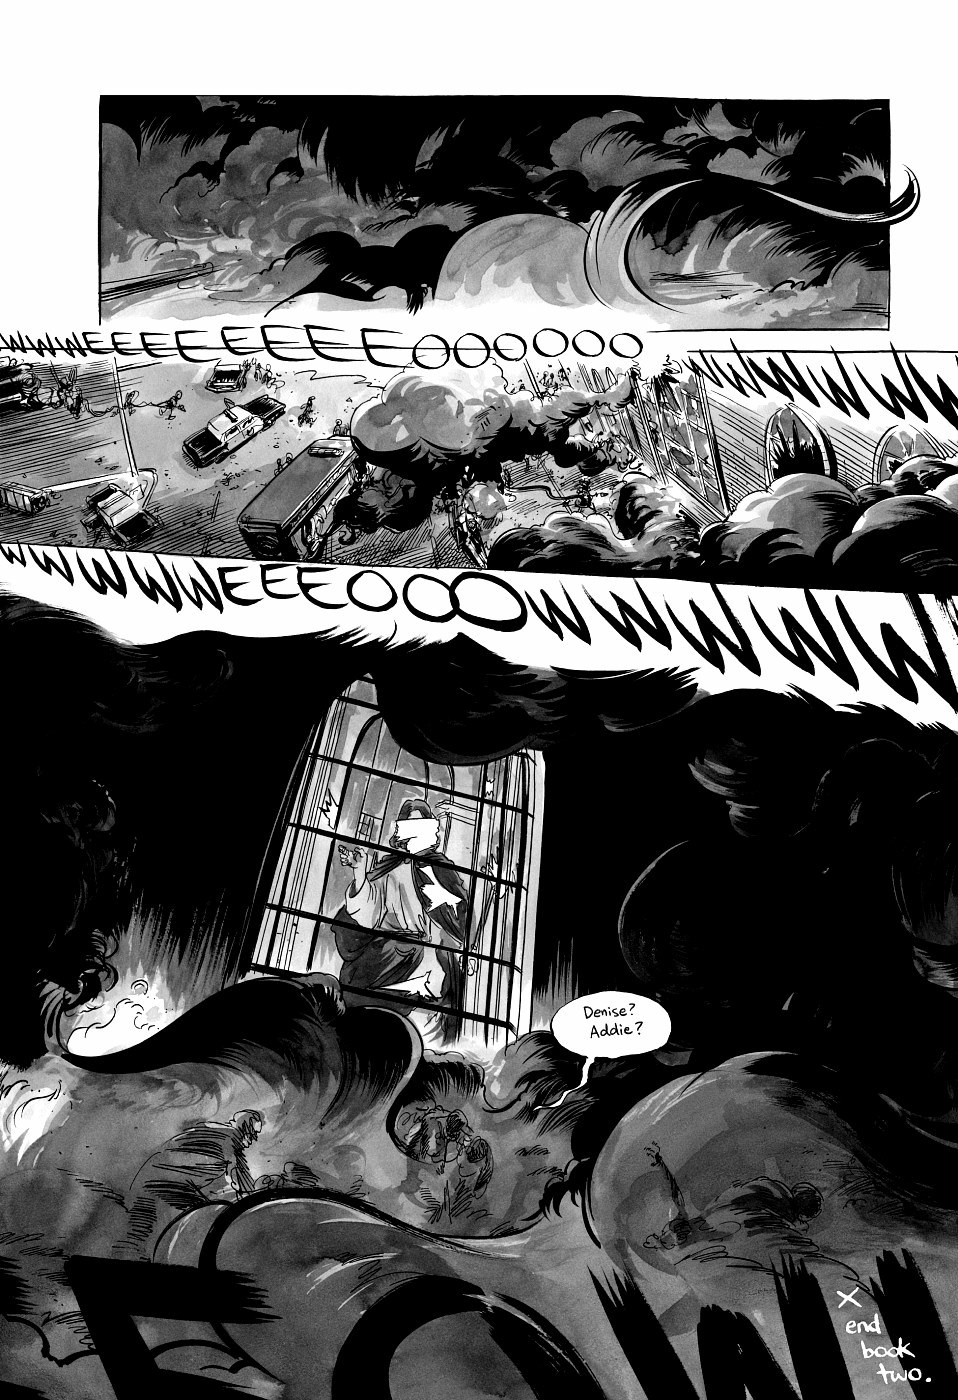 page 179 march book two graphic novel